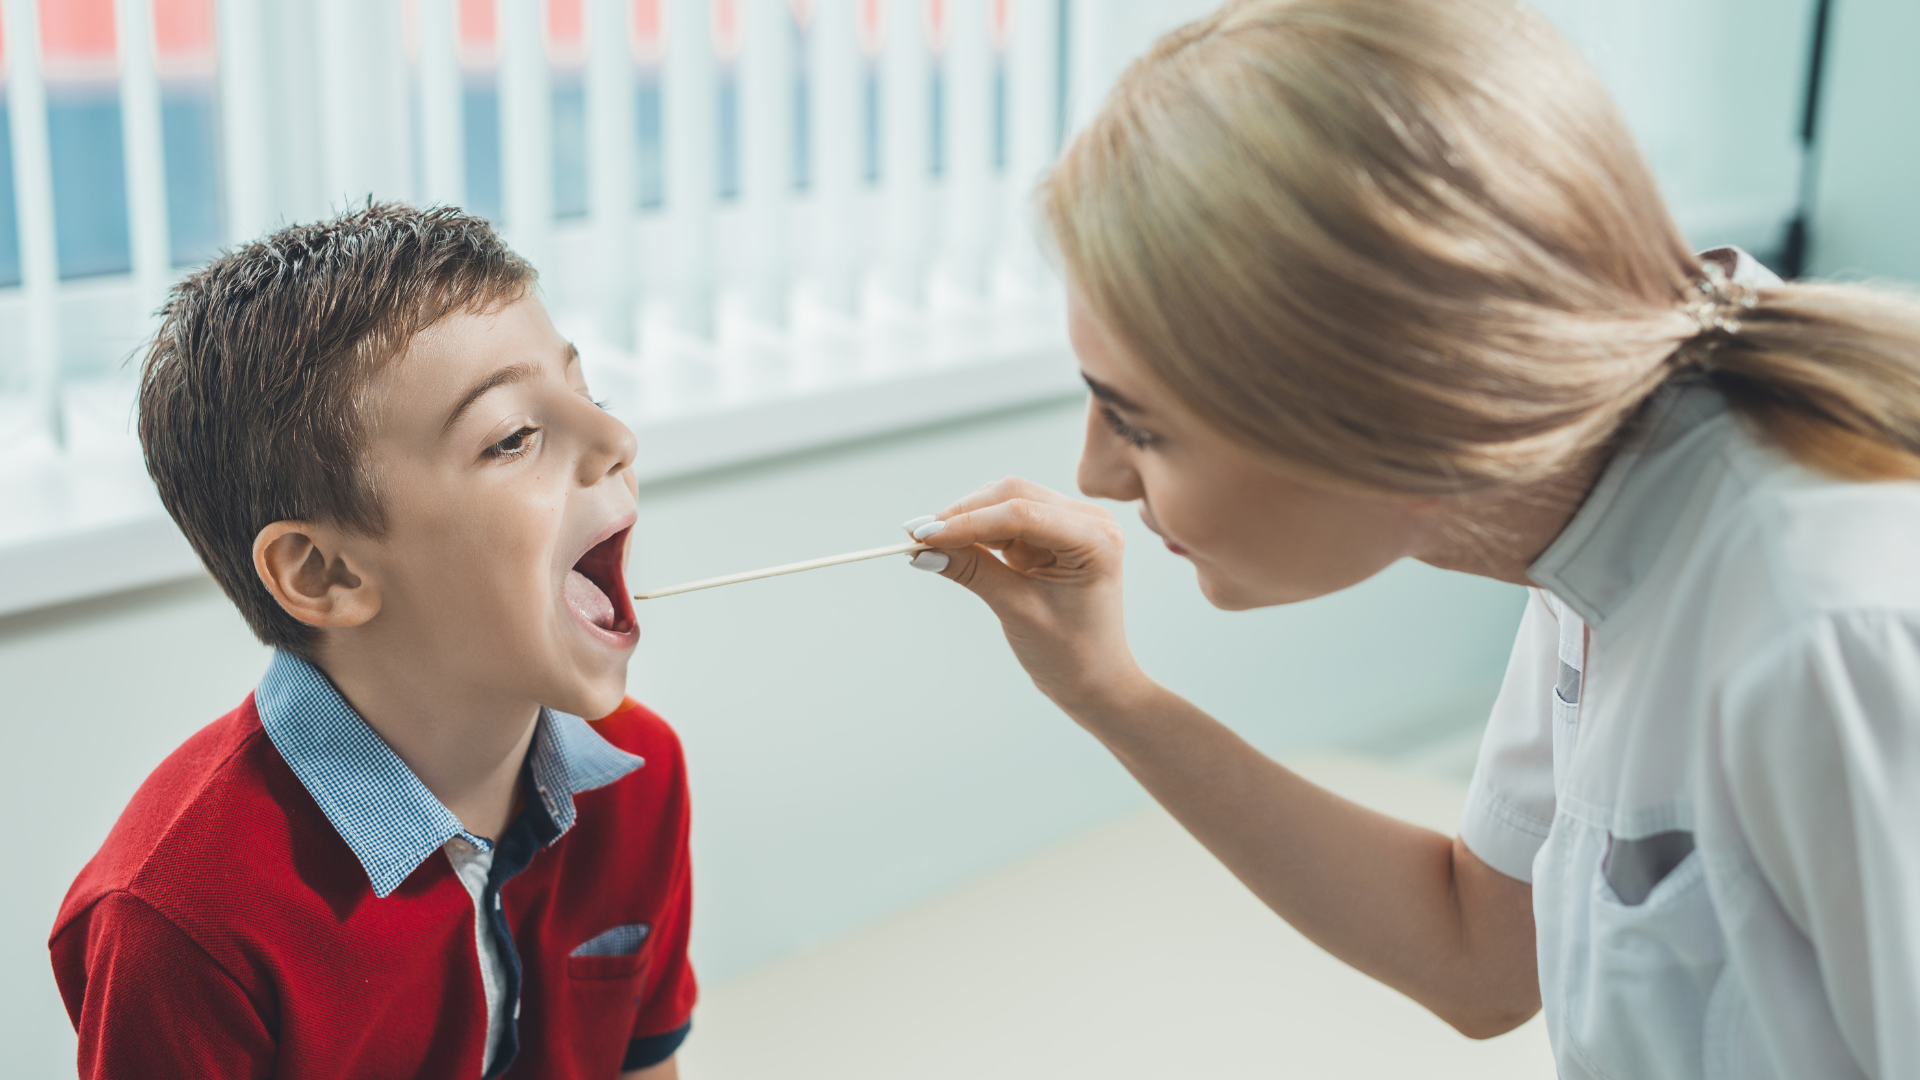 A boy wearing red opening his mouth for a nurse wearing light blue to take a throat swab, testing for strep throat in a traditional manner.